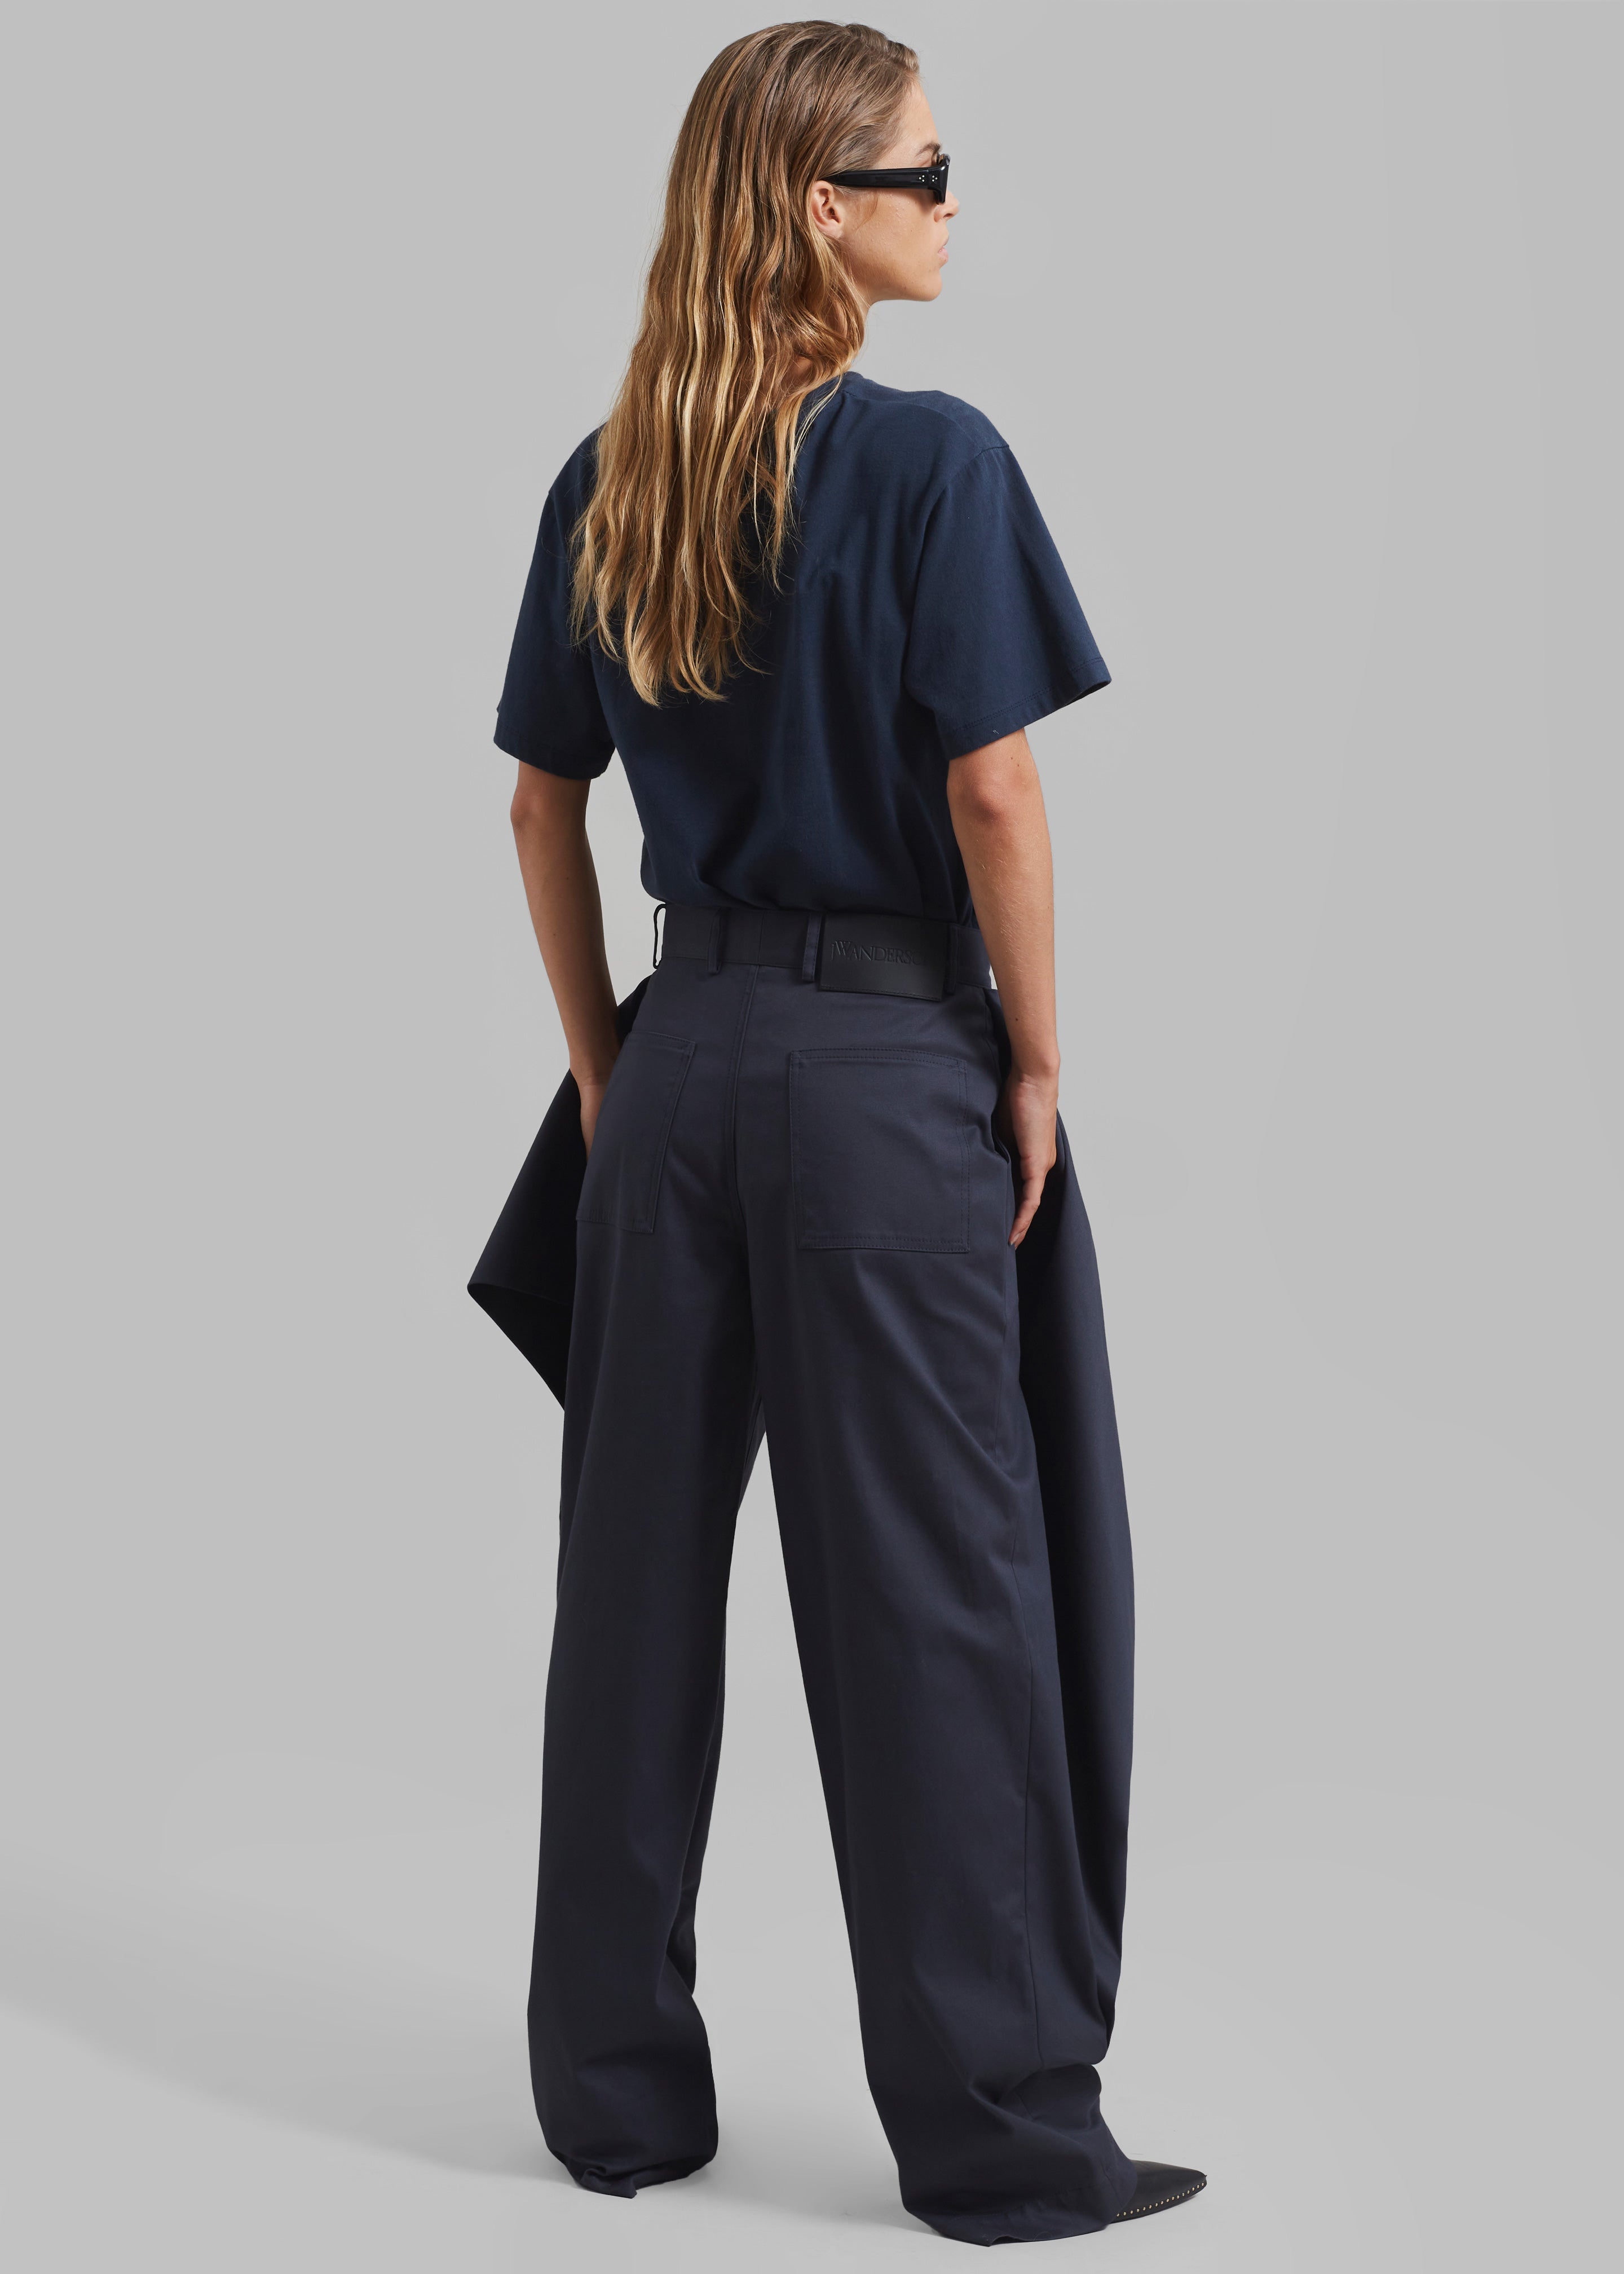 JW Anderson Kite Trousers - Navy - 9